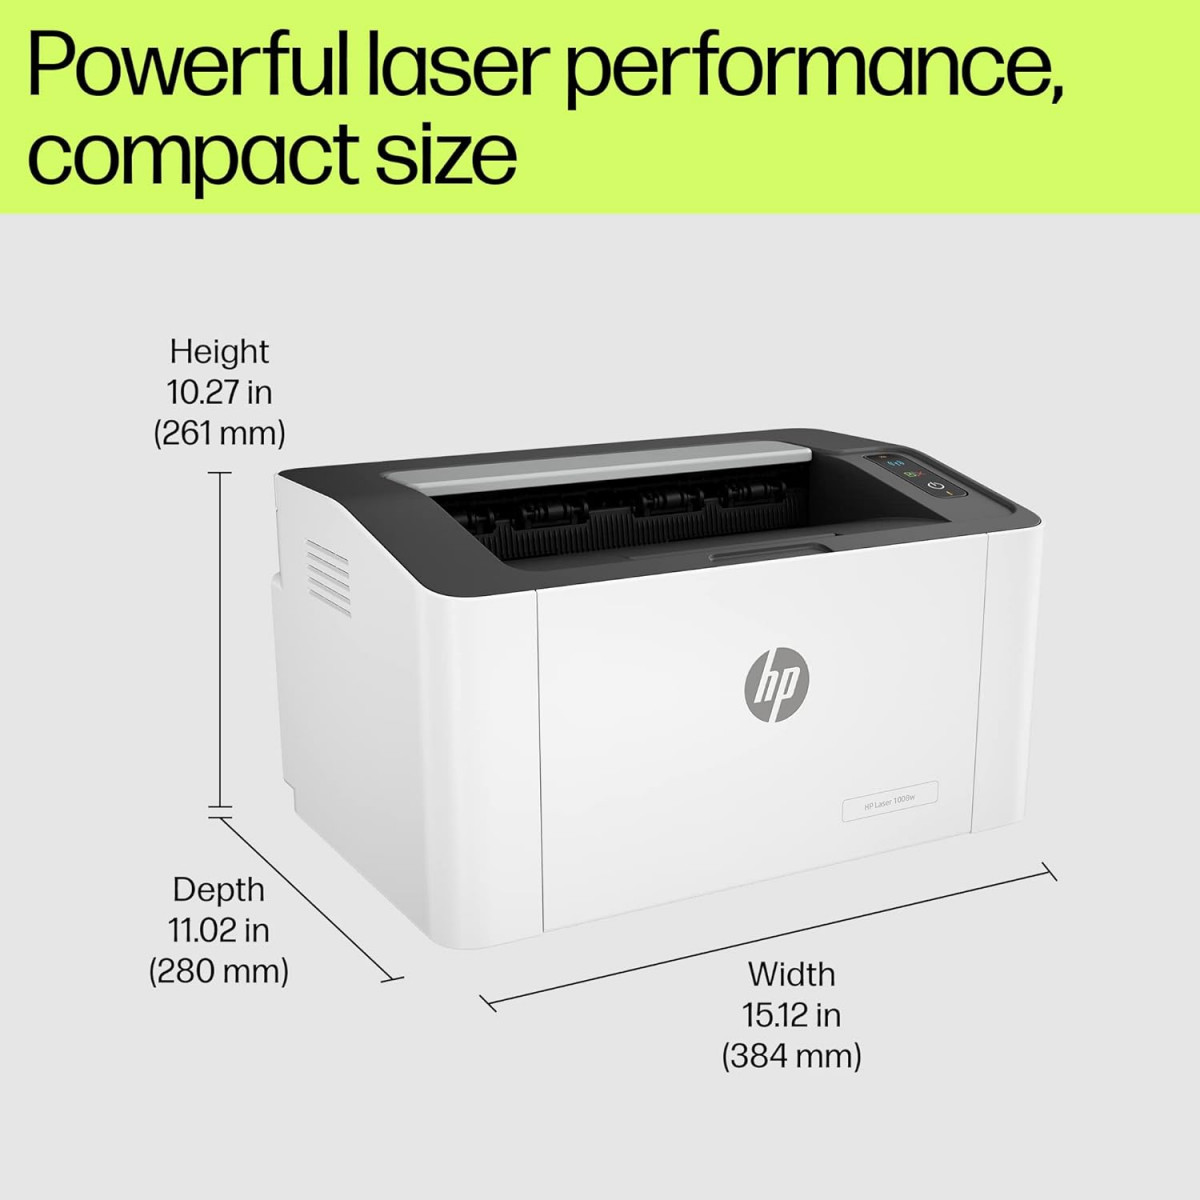 HP Laser 1008w Printer Wireless Single Function Print Hi-Speed USB 20 Up to 21 ppm 150-sheet Input Tray 100-sheet Output Tray 10000-page Duty Cycle 1-Year Warranty Black and White 714Z9A